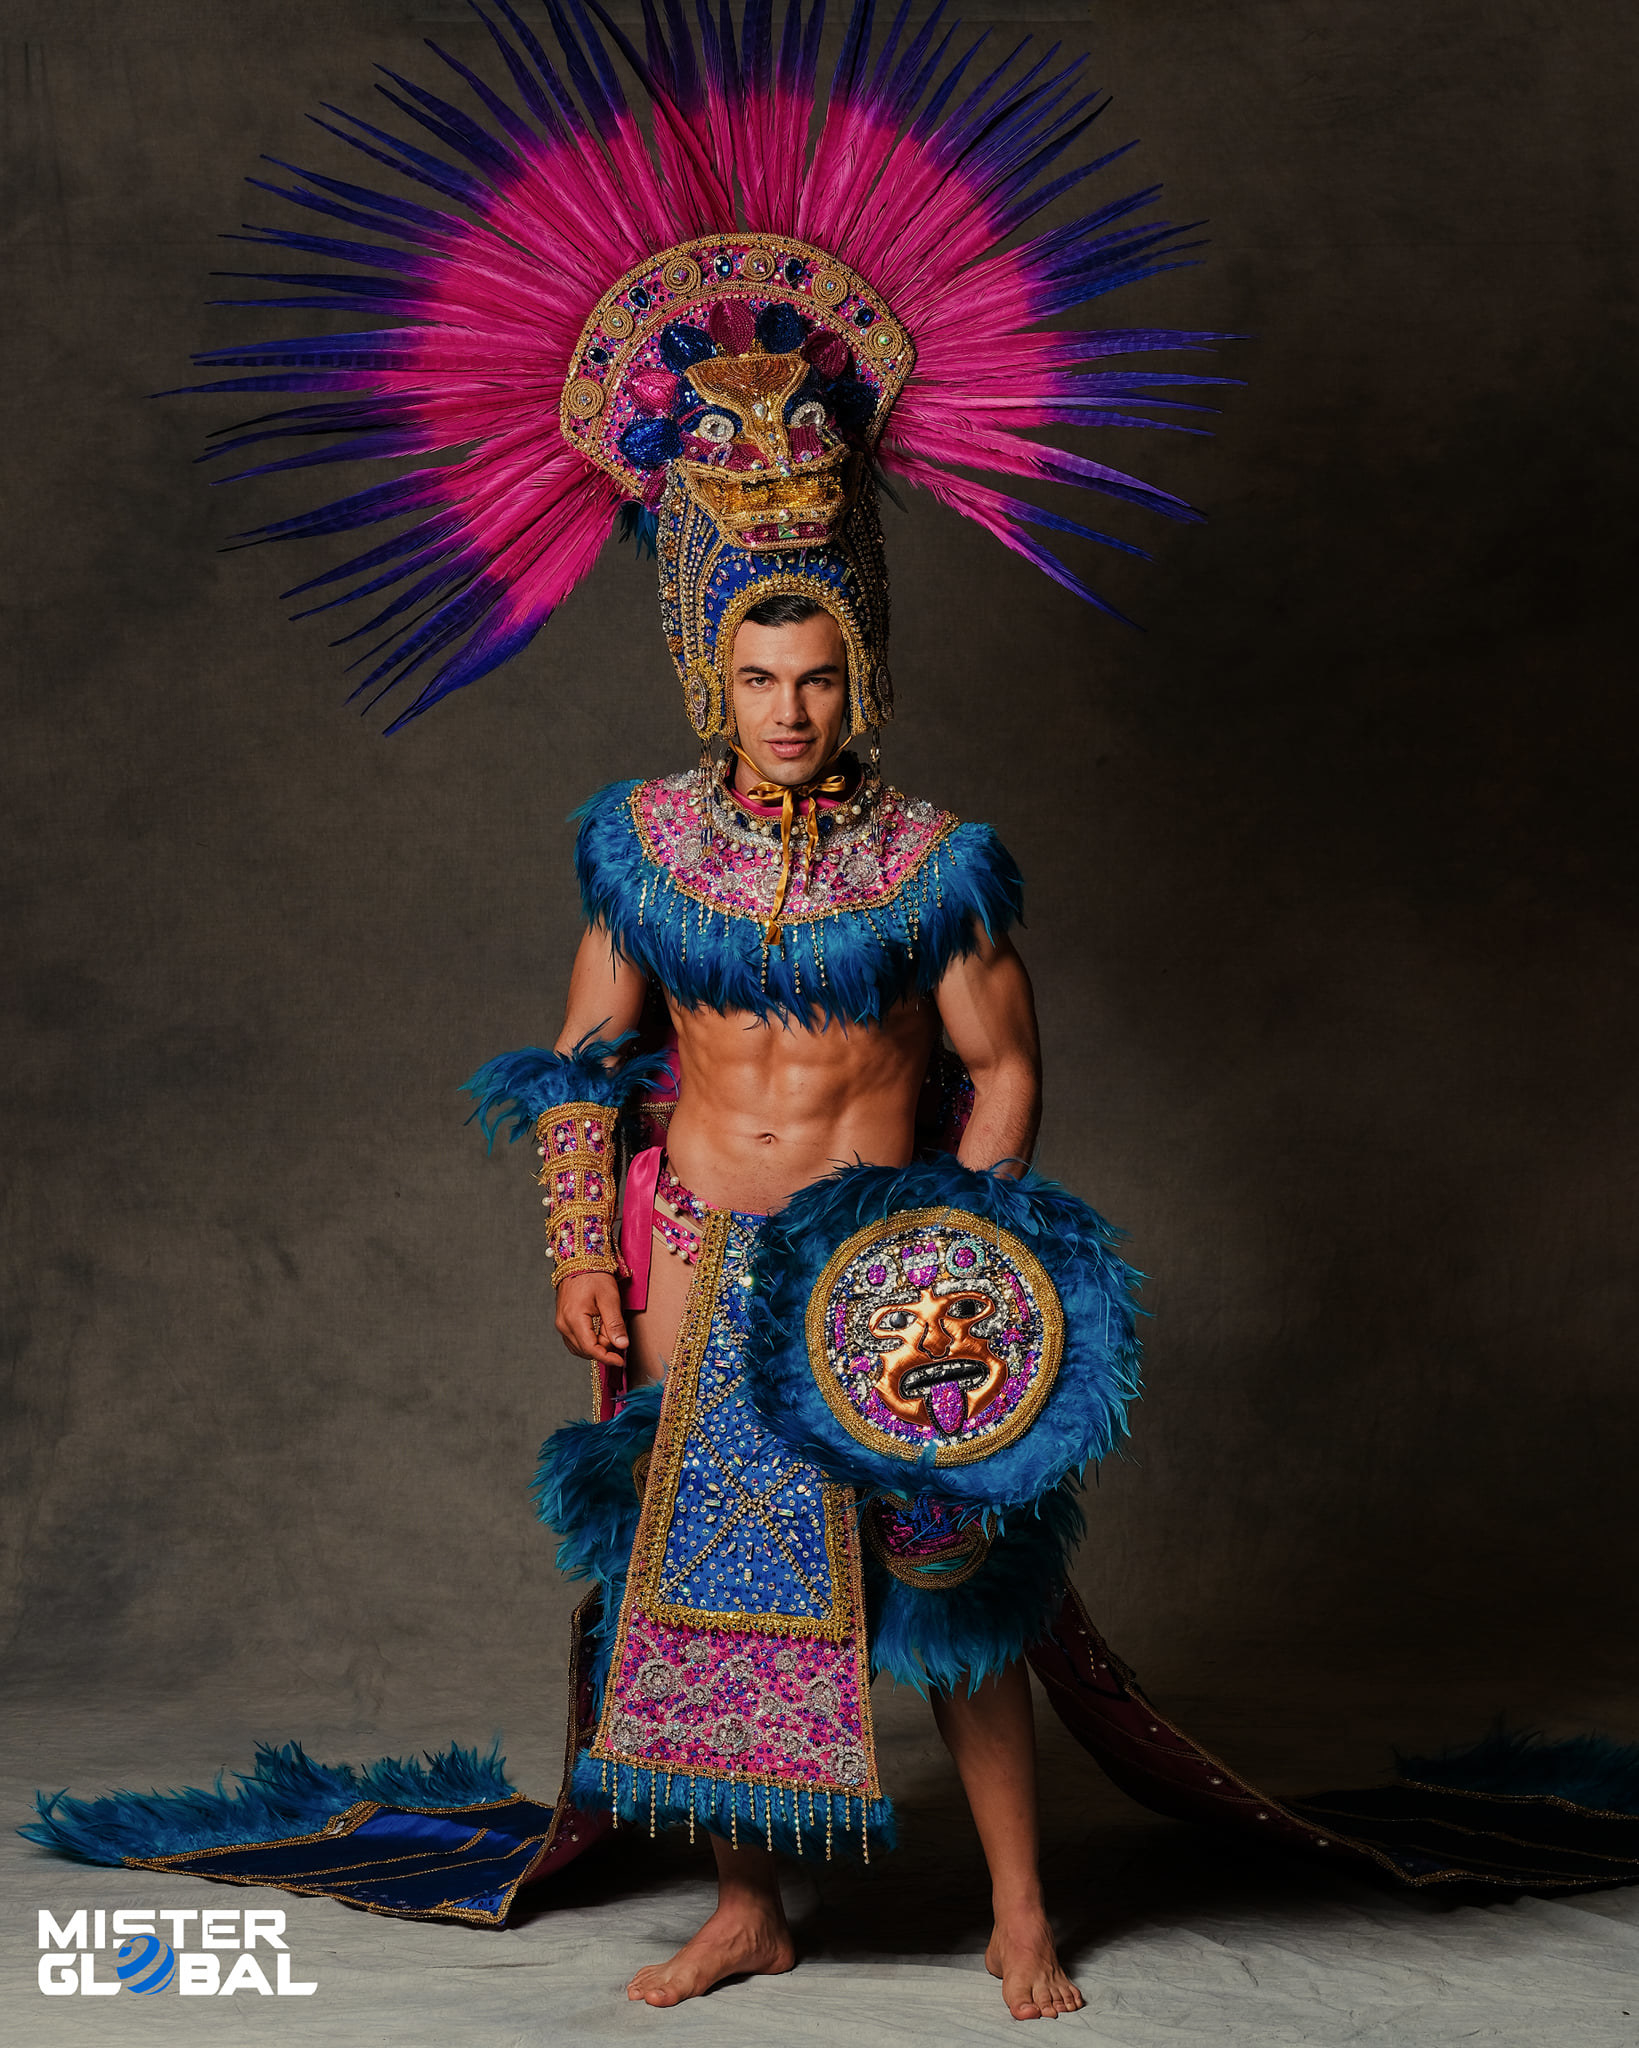 Barefoot man with ornate, feathered headdress, and ornate, chest-baring outfit